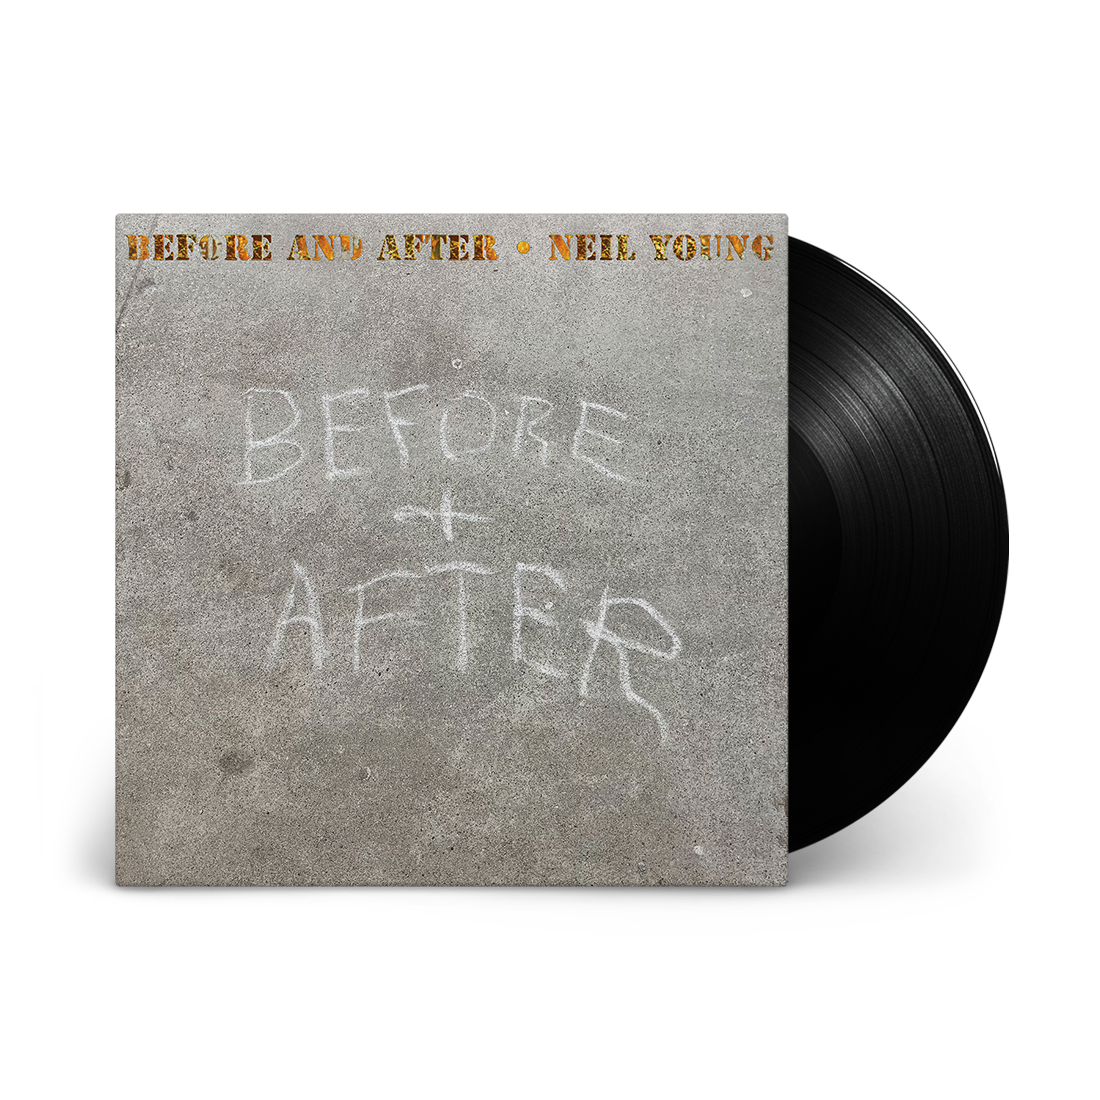 Neil Young - Before And After: Vinyl LP